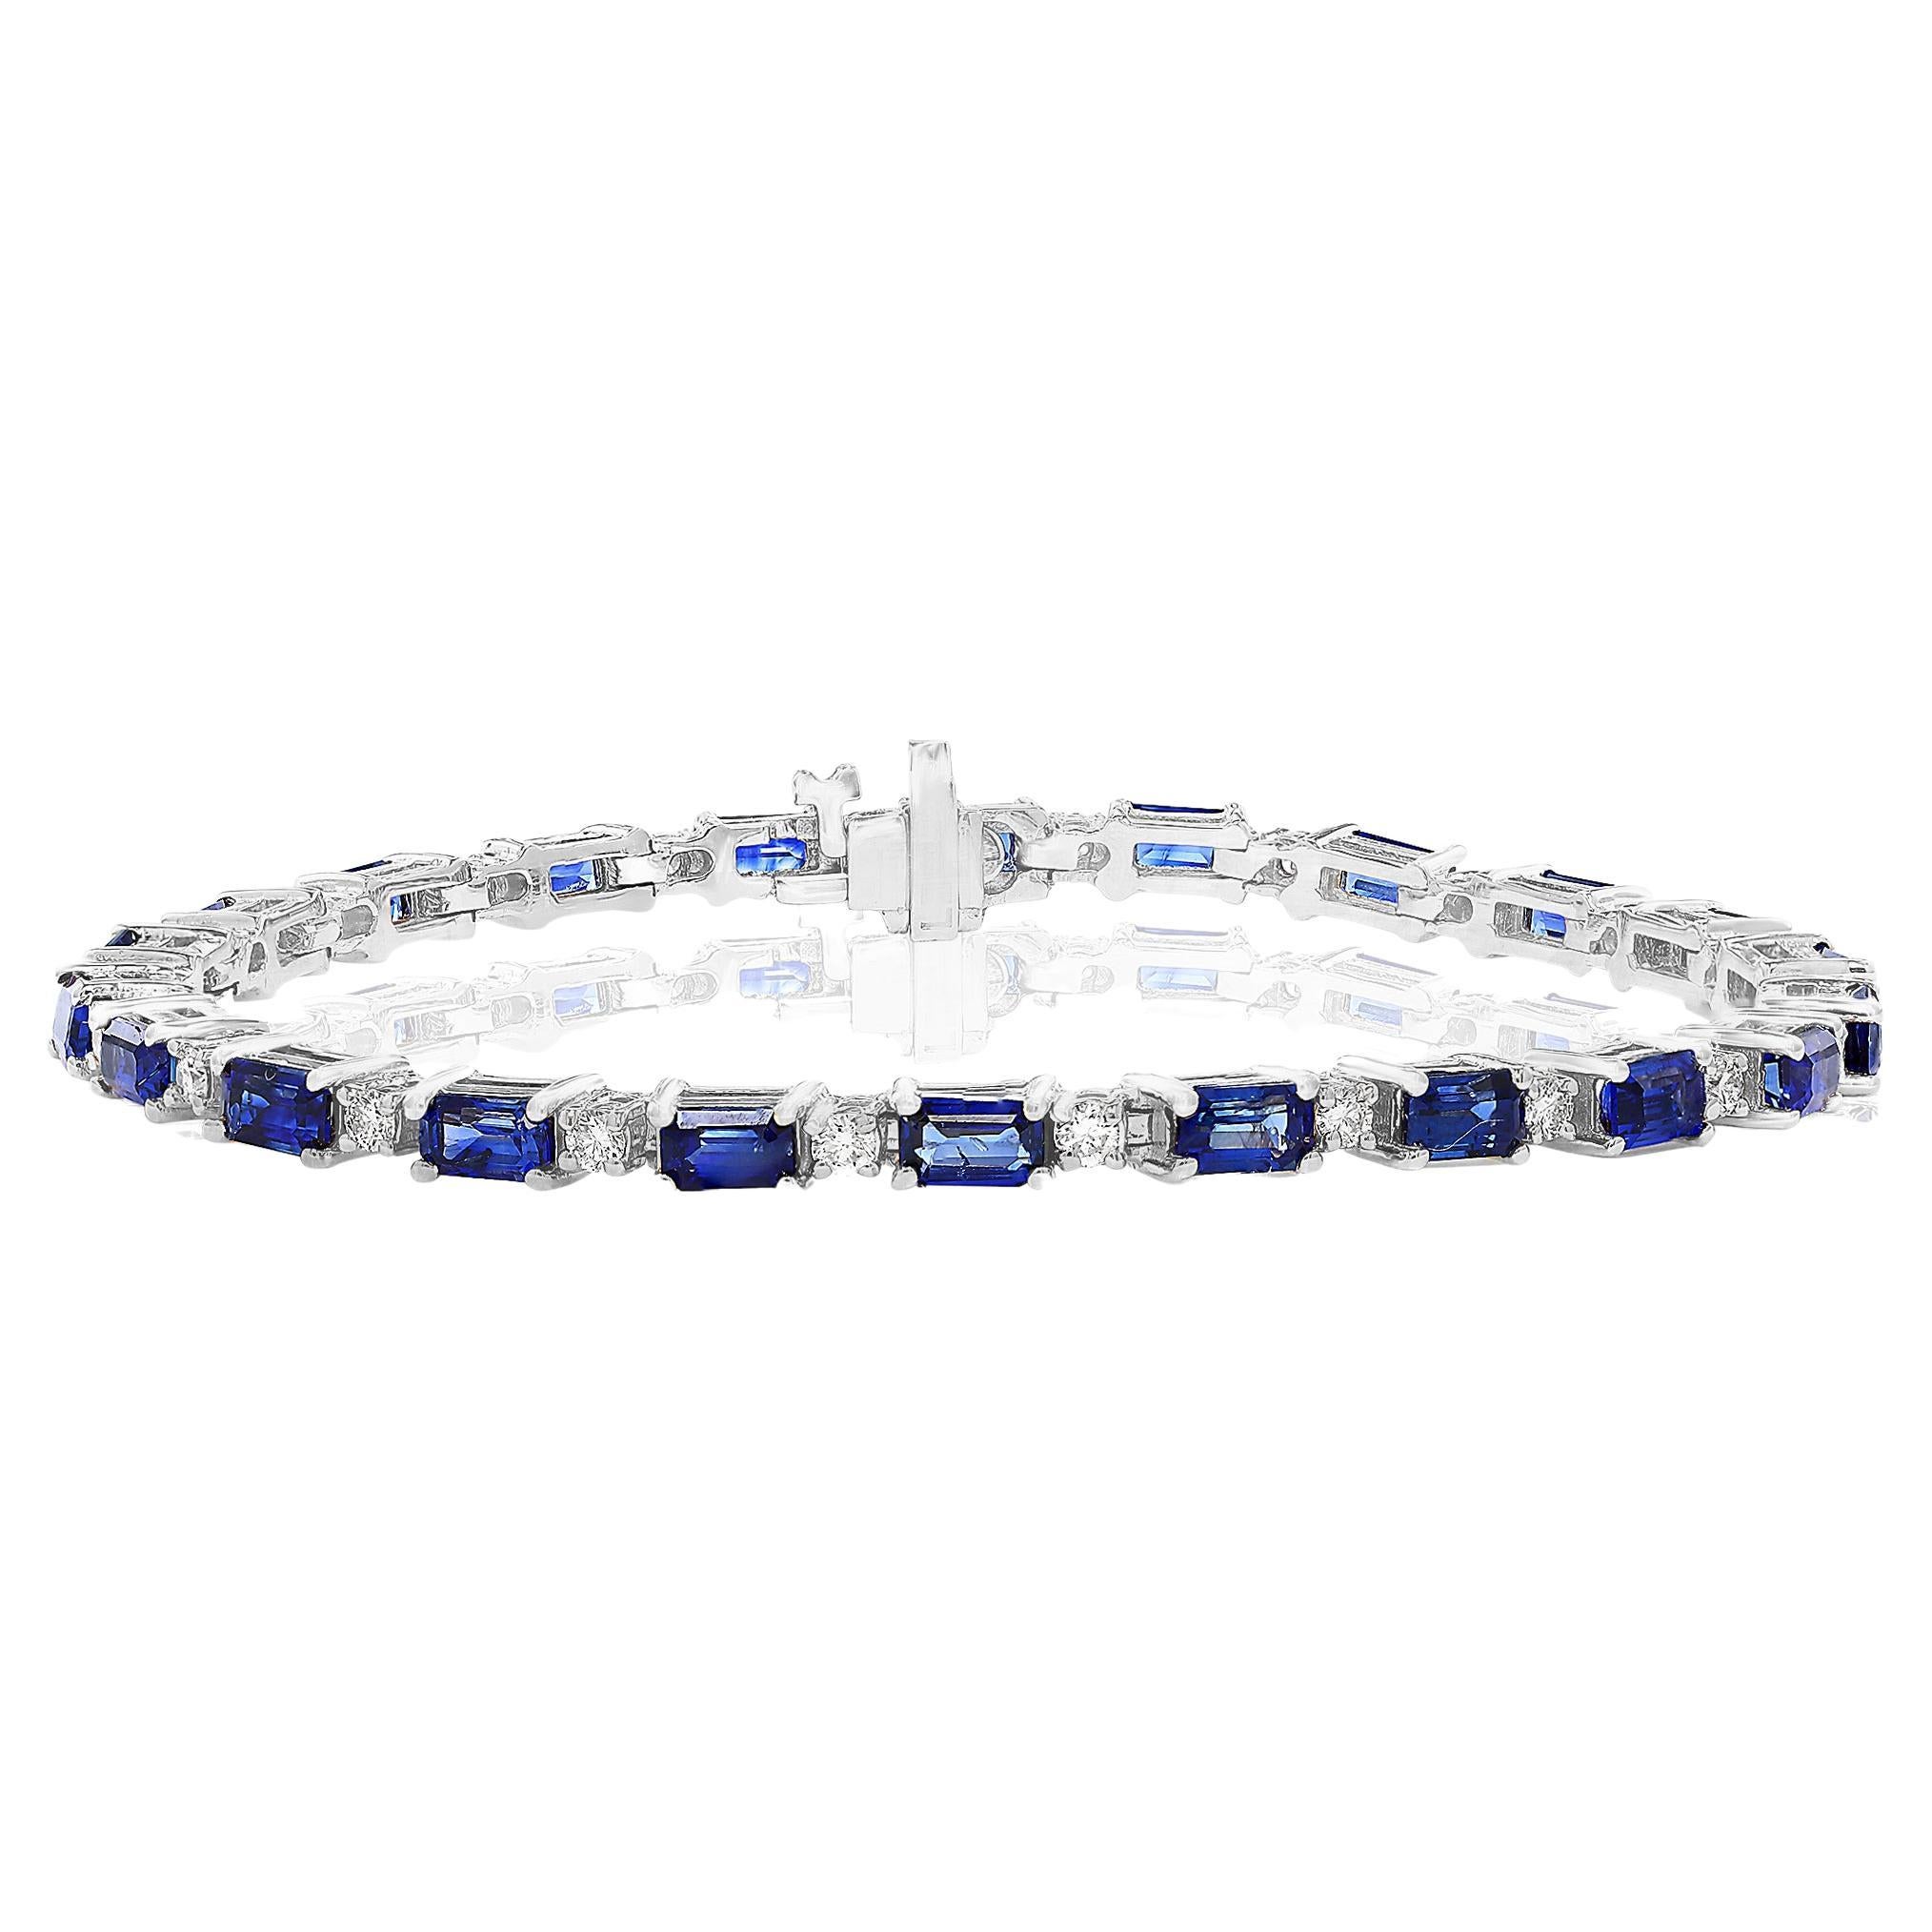 7.17 Carat Emerald Cut Blue Sapphire and Diamond Bracelet in 14K White Gold For Sale